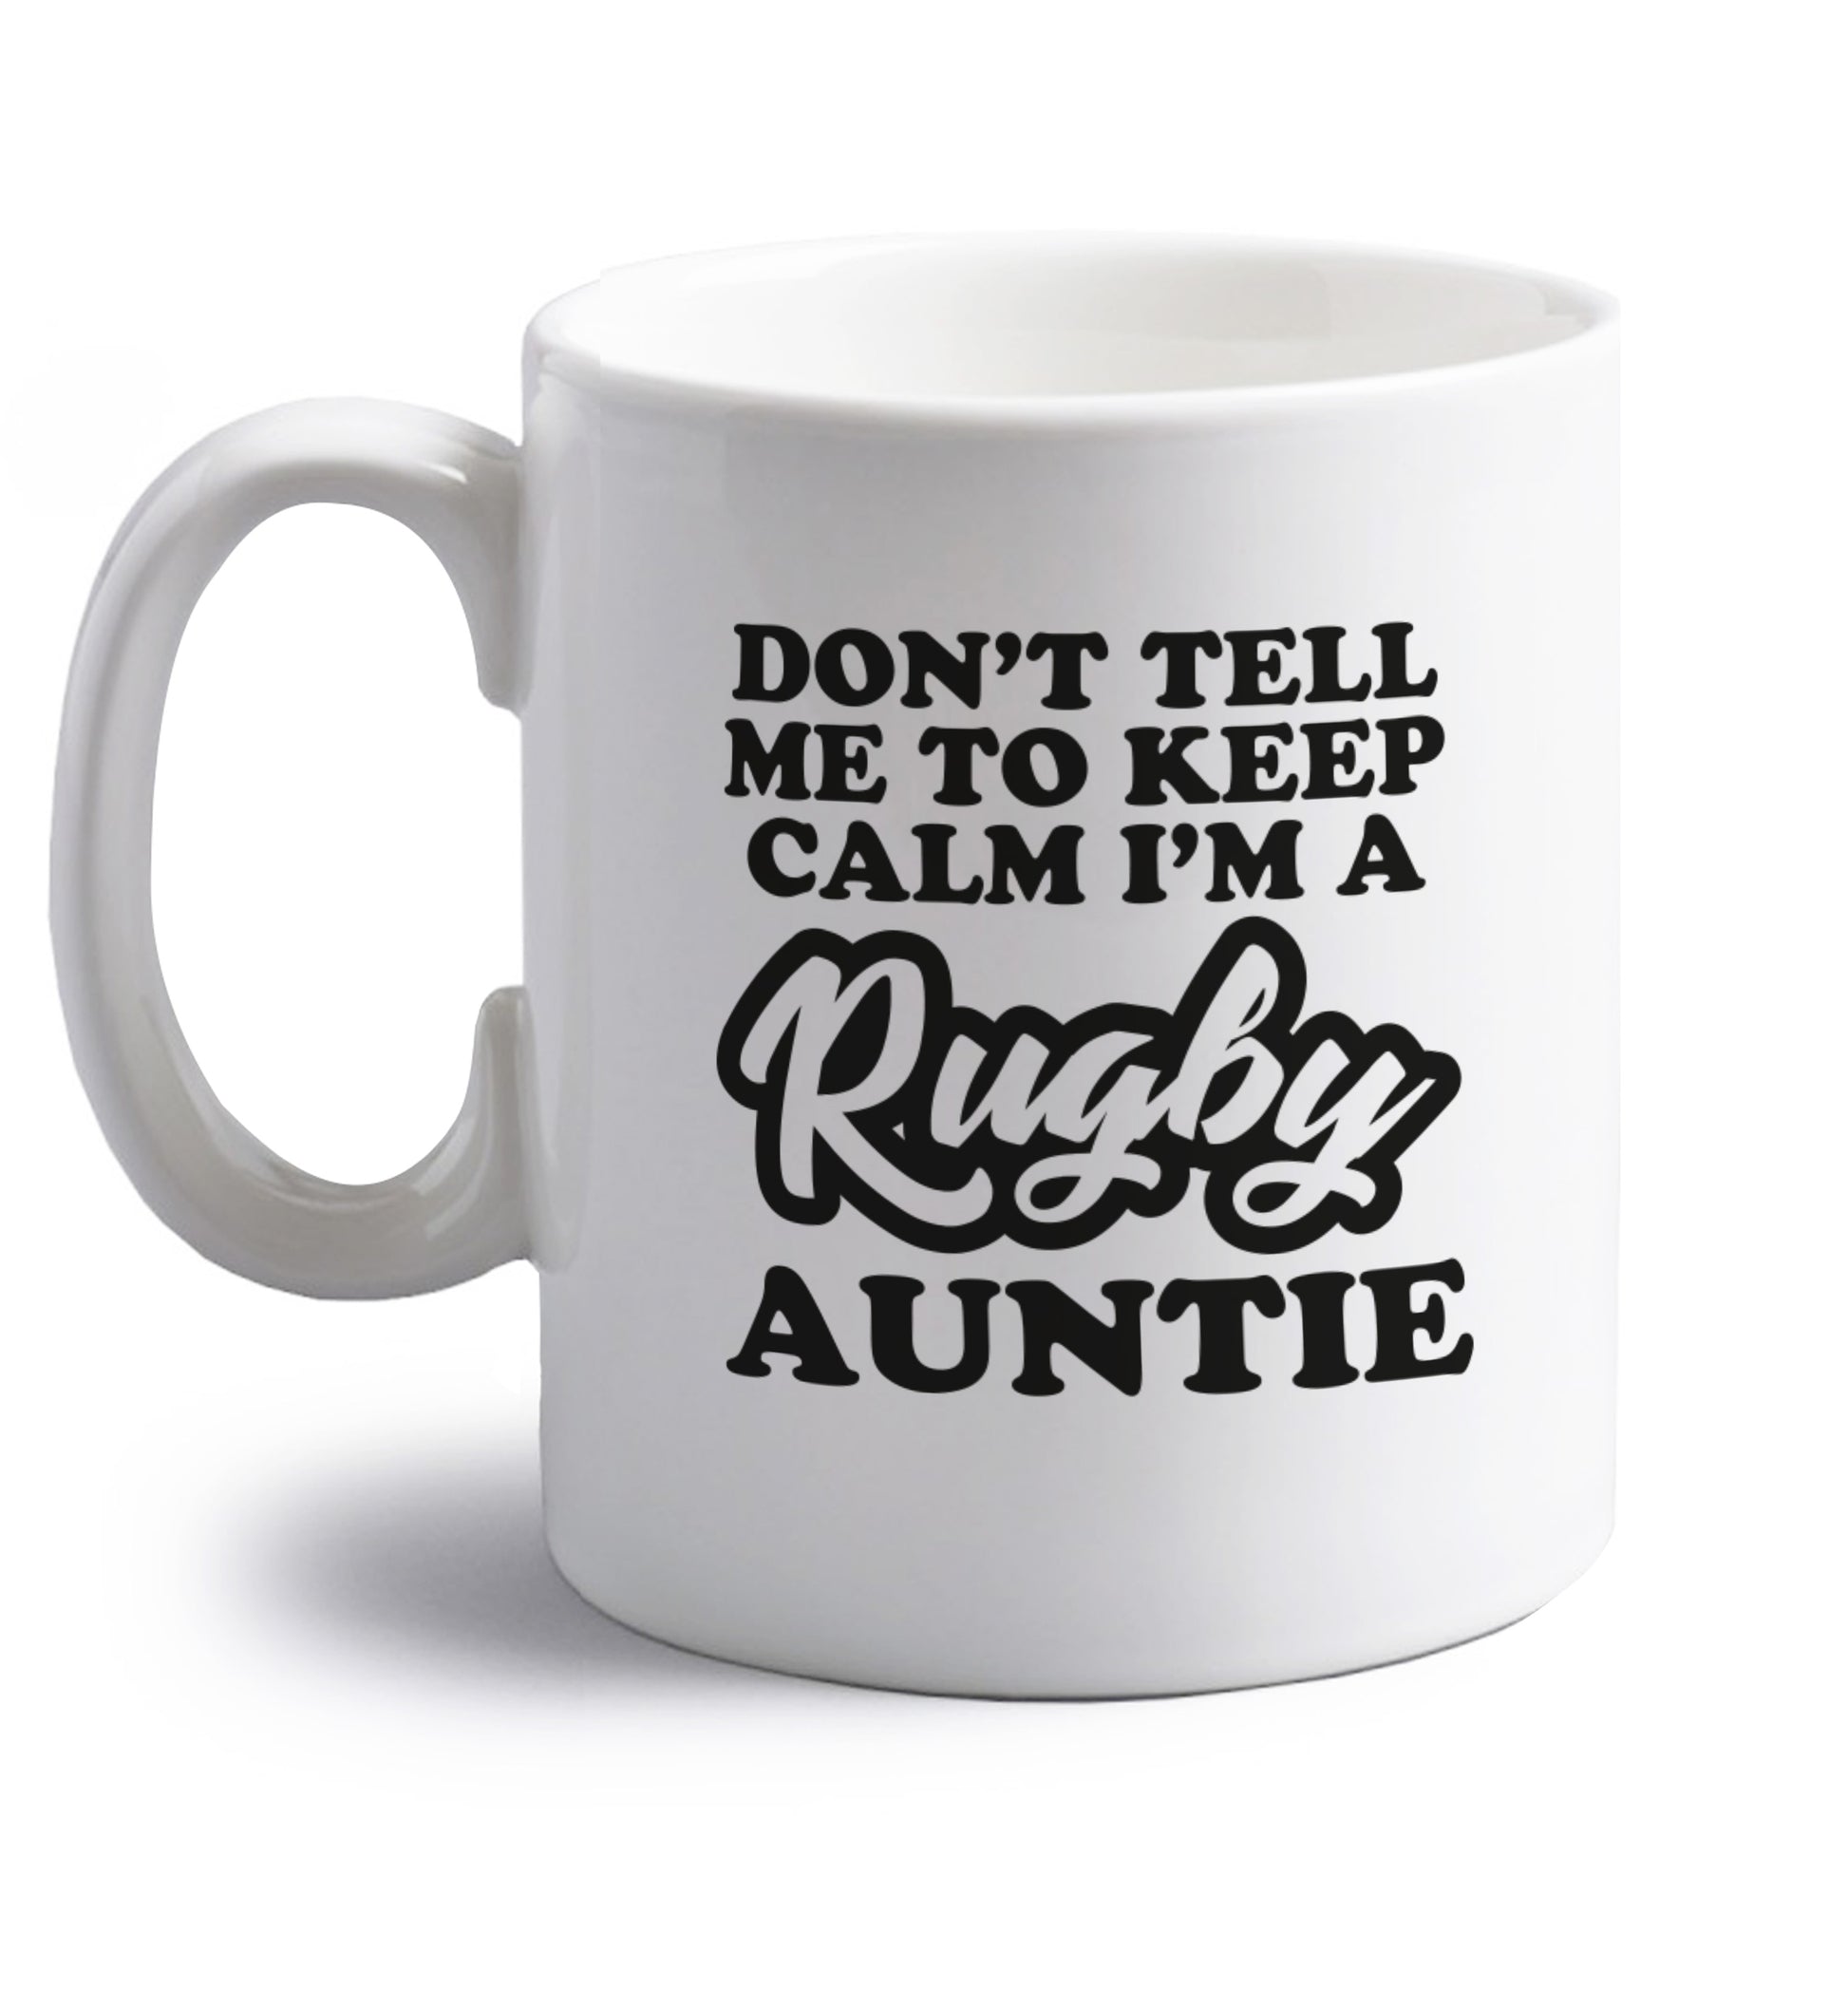 Don't tell me keep calm I'm a rugby auntie right handed white ceramic mug 